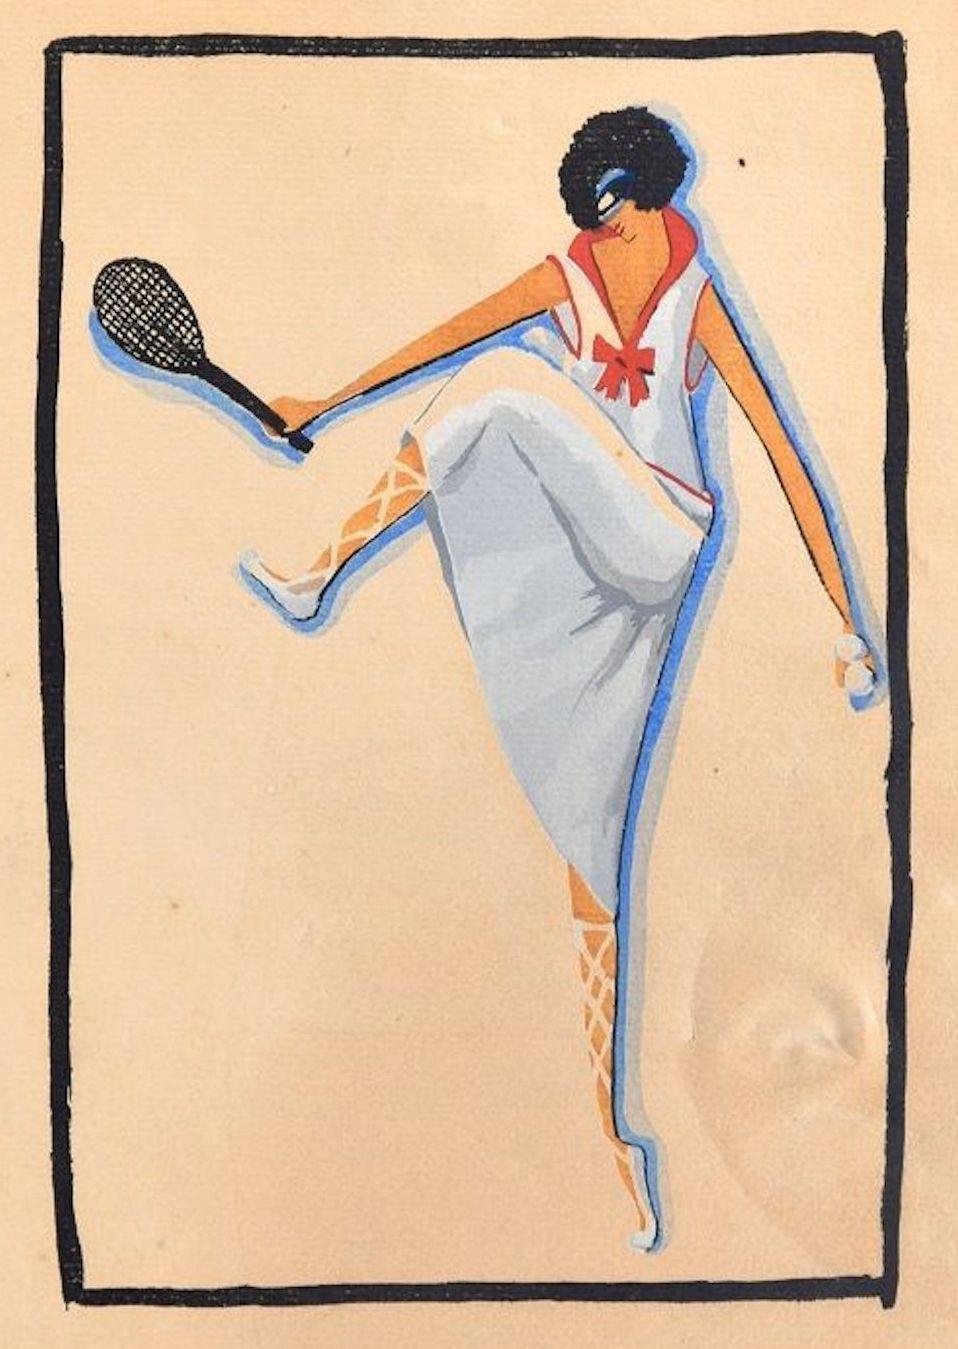 Unknown Figurative Print – Tennis Player / Woodcut Hand Colored in Tempera on Paper - Art Deco - 1920s